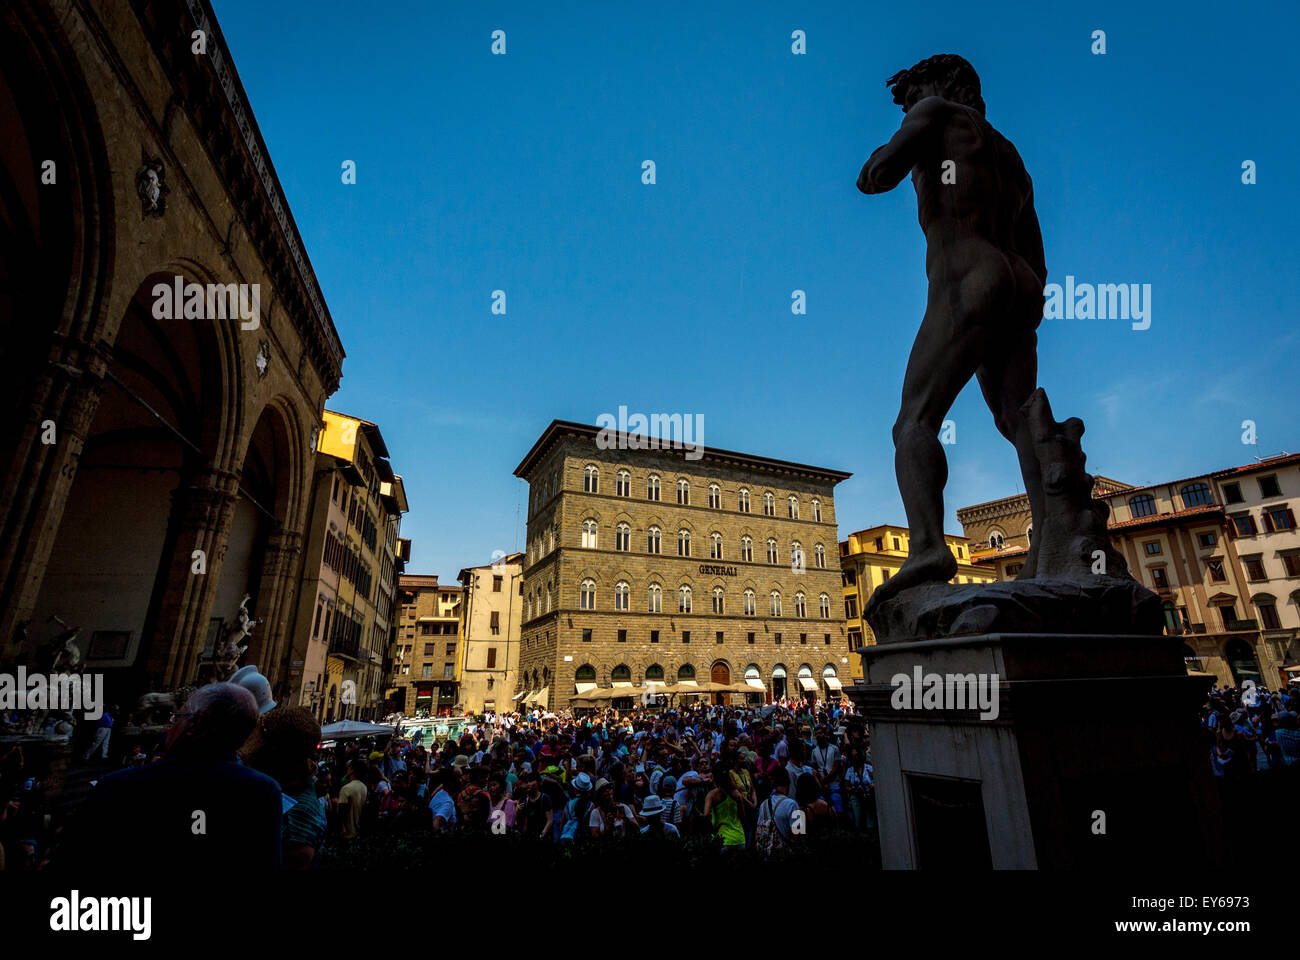 Rear view of Michelangelo's statue of David and sculptures at Loggia Della Signoria. Florence, Italy. Stock Photo